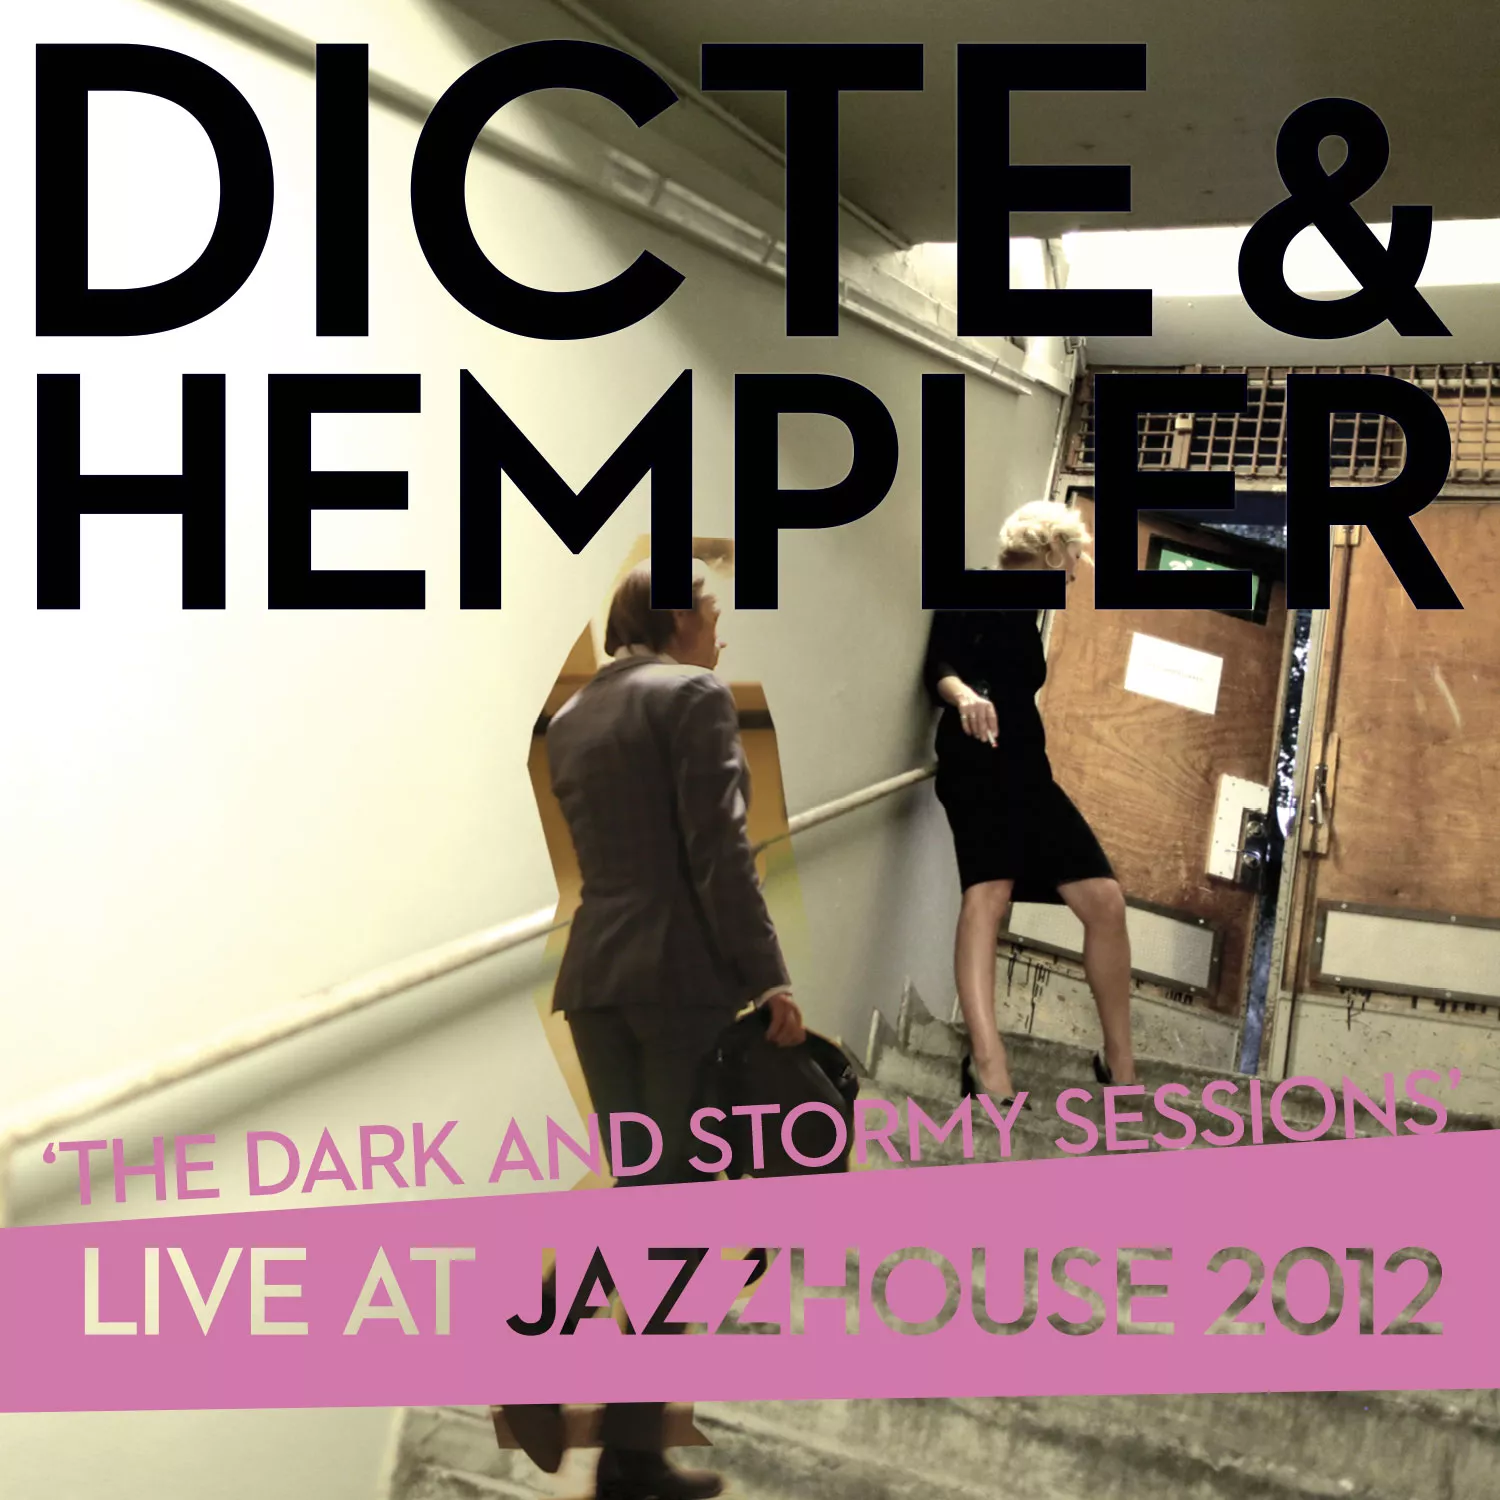 The Dark And Stormy Sessions - Dicte & Hempler